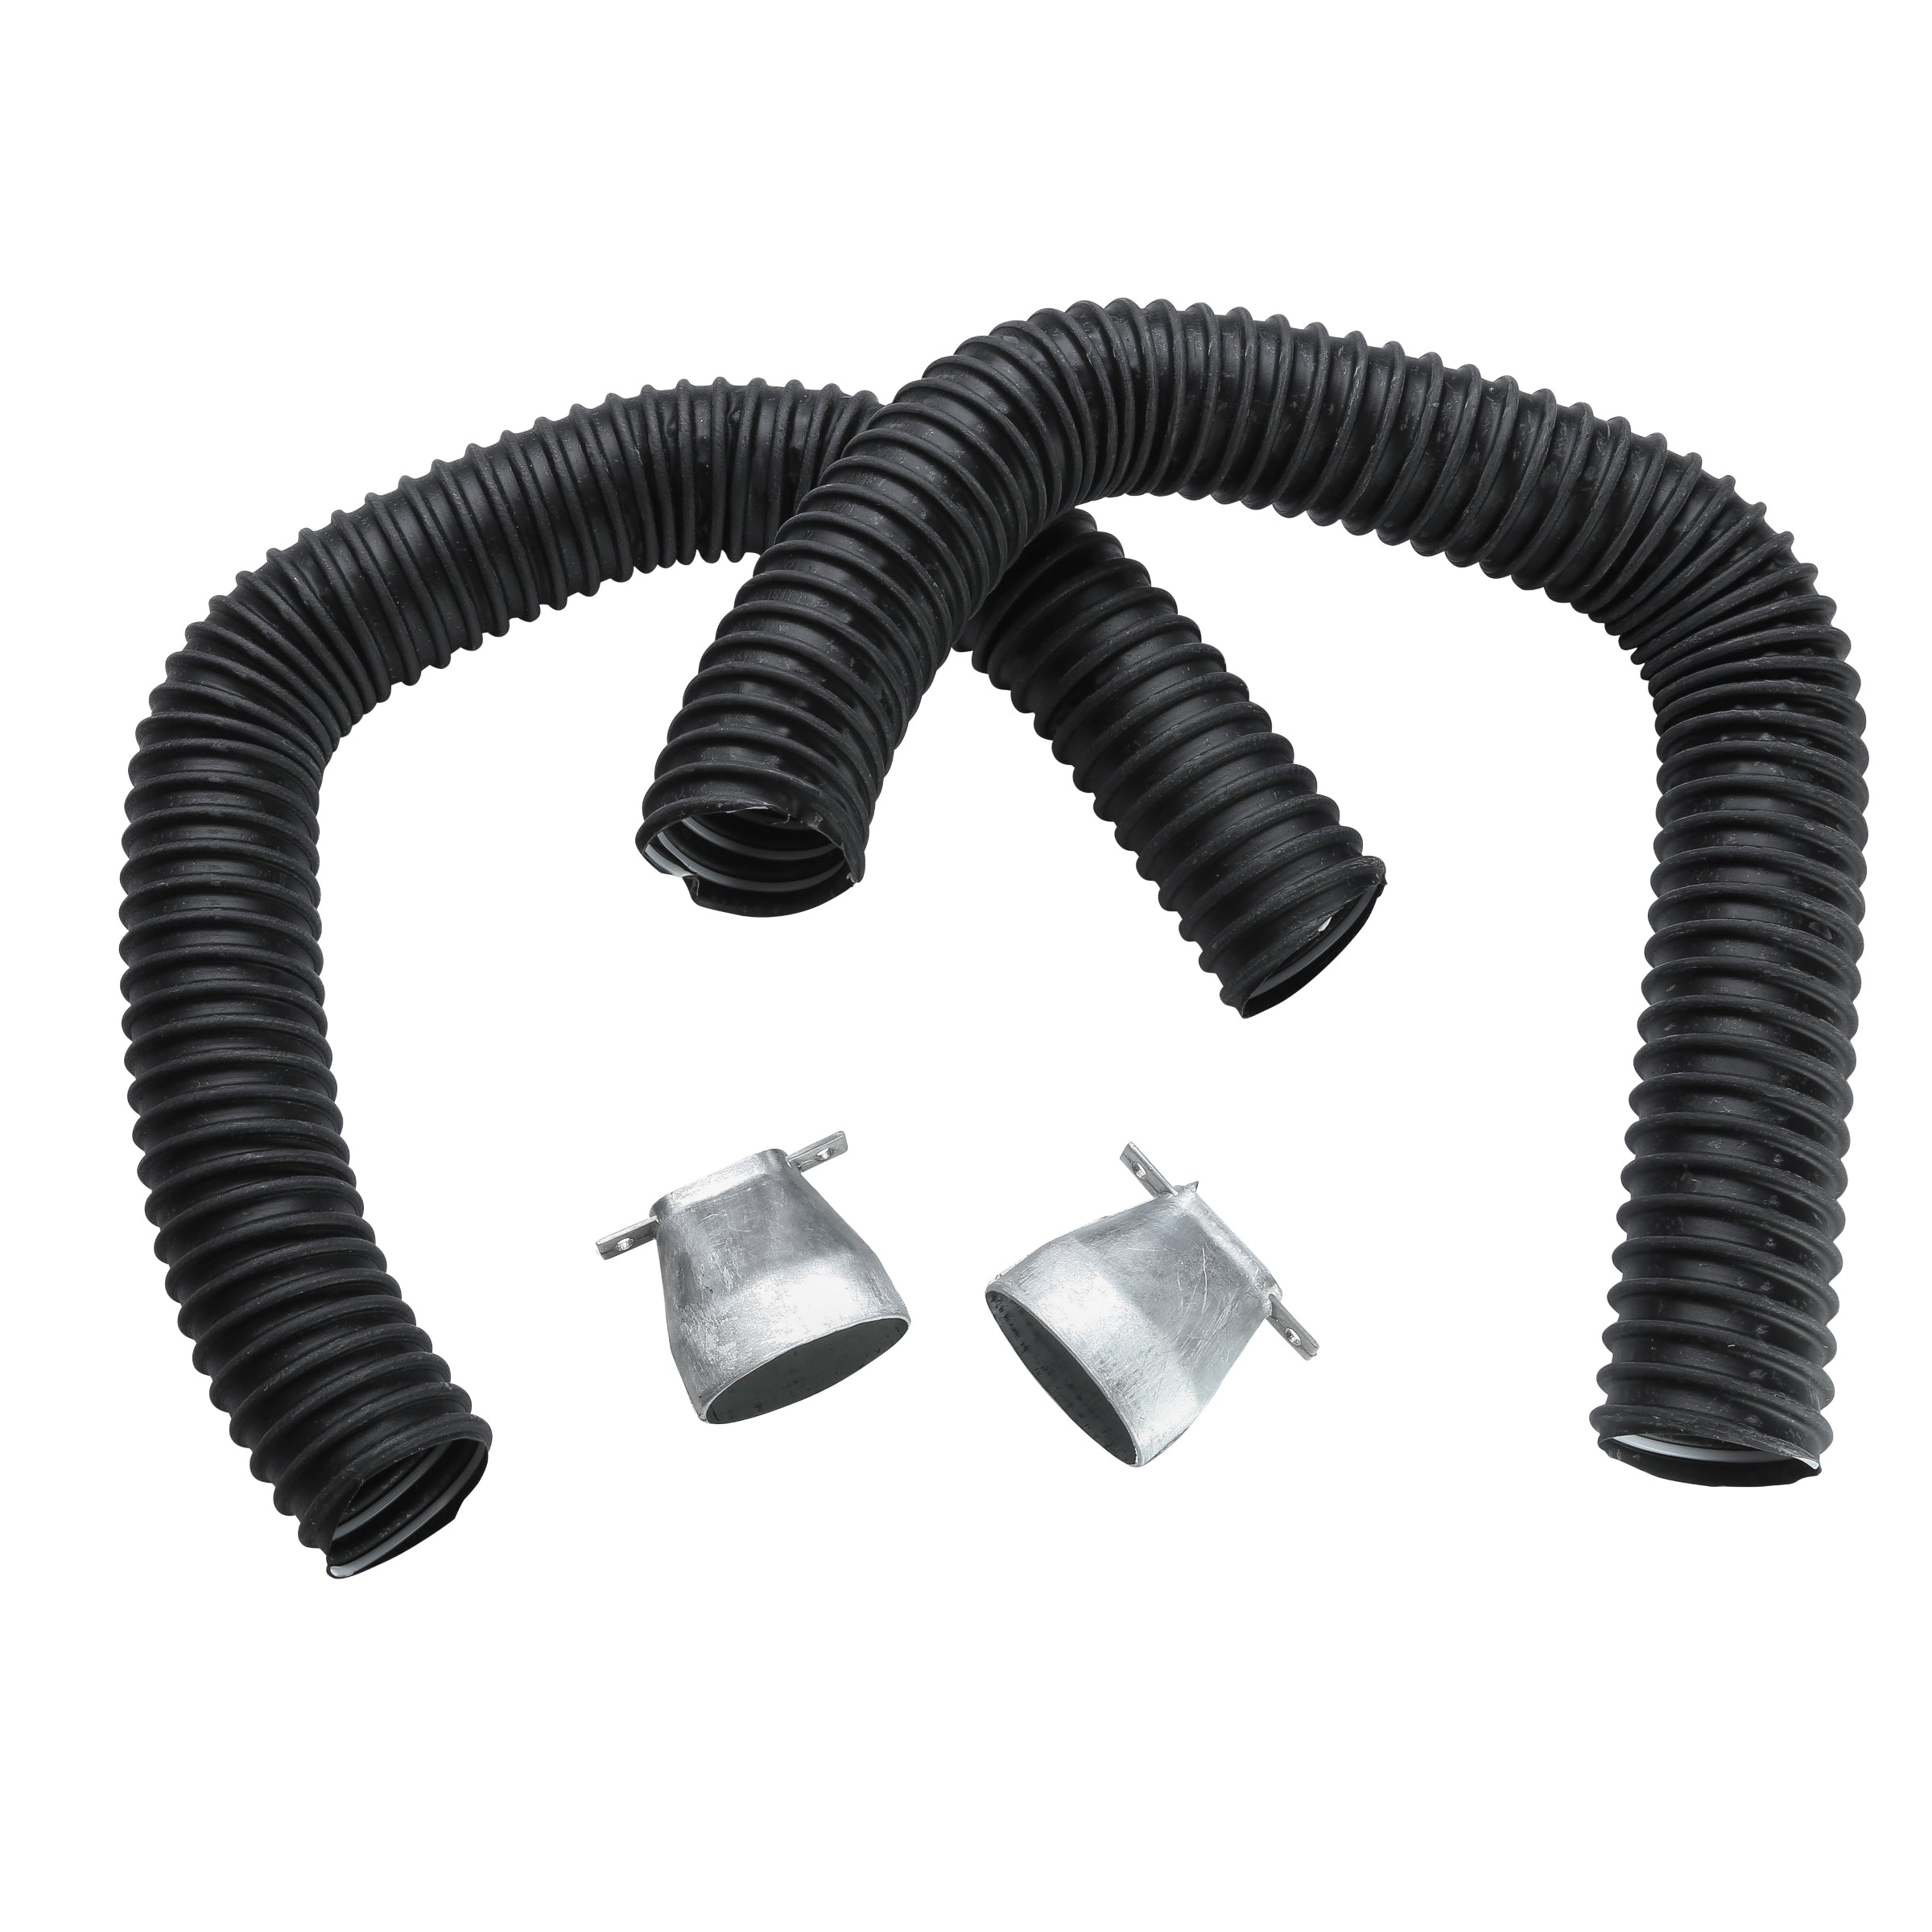 Heater Defroster Nozzle and Hose Kit • 1940 Ford Passenger & Pickup